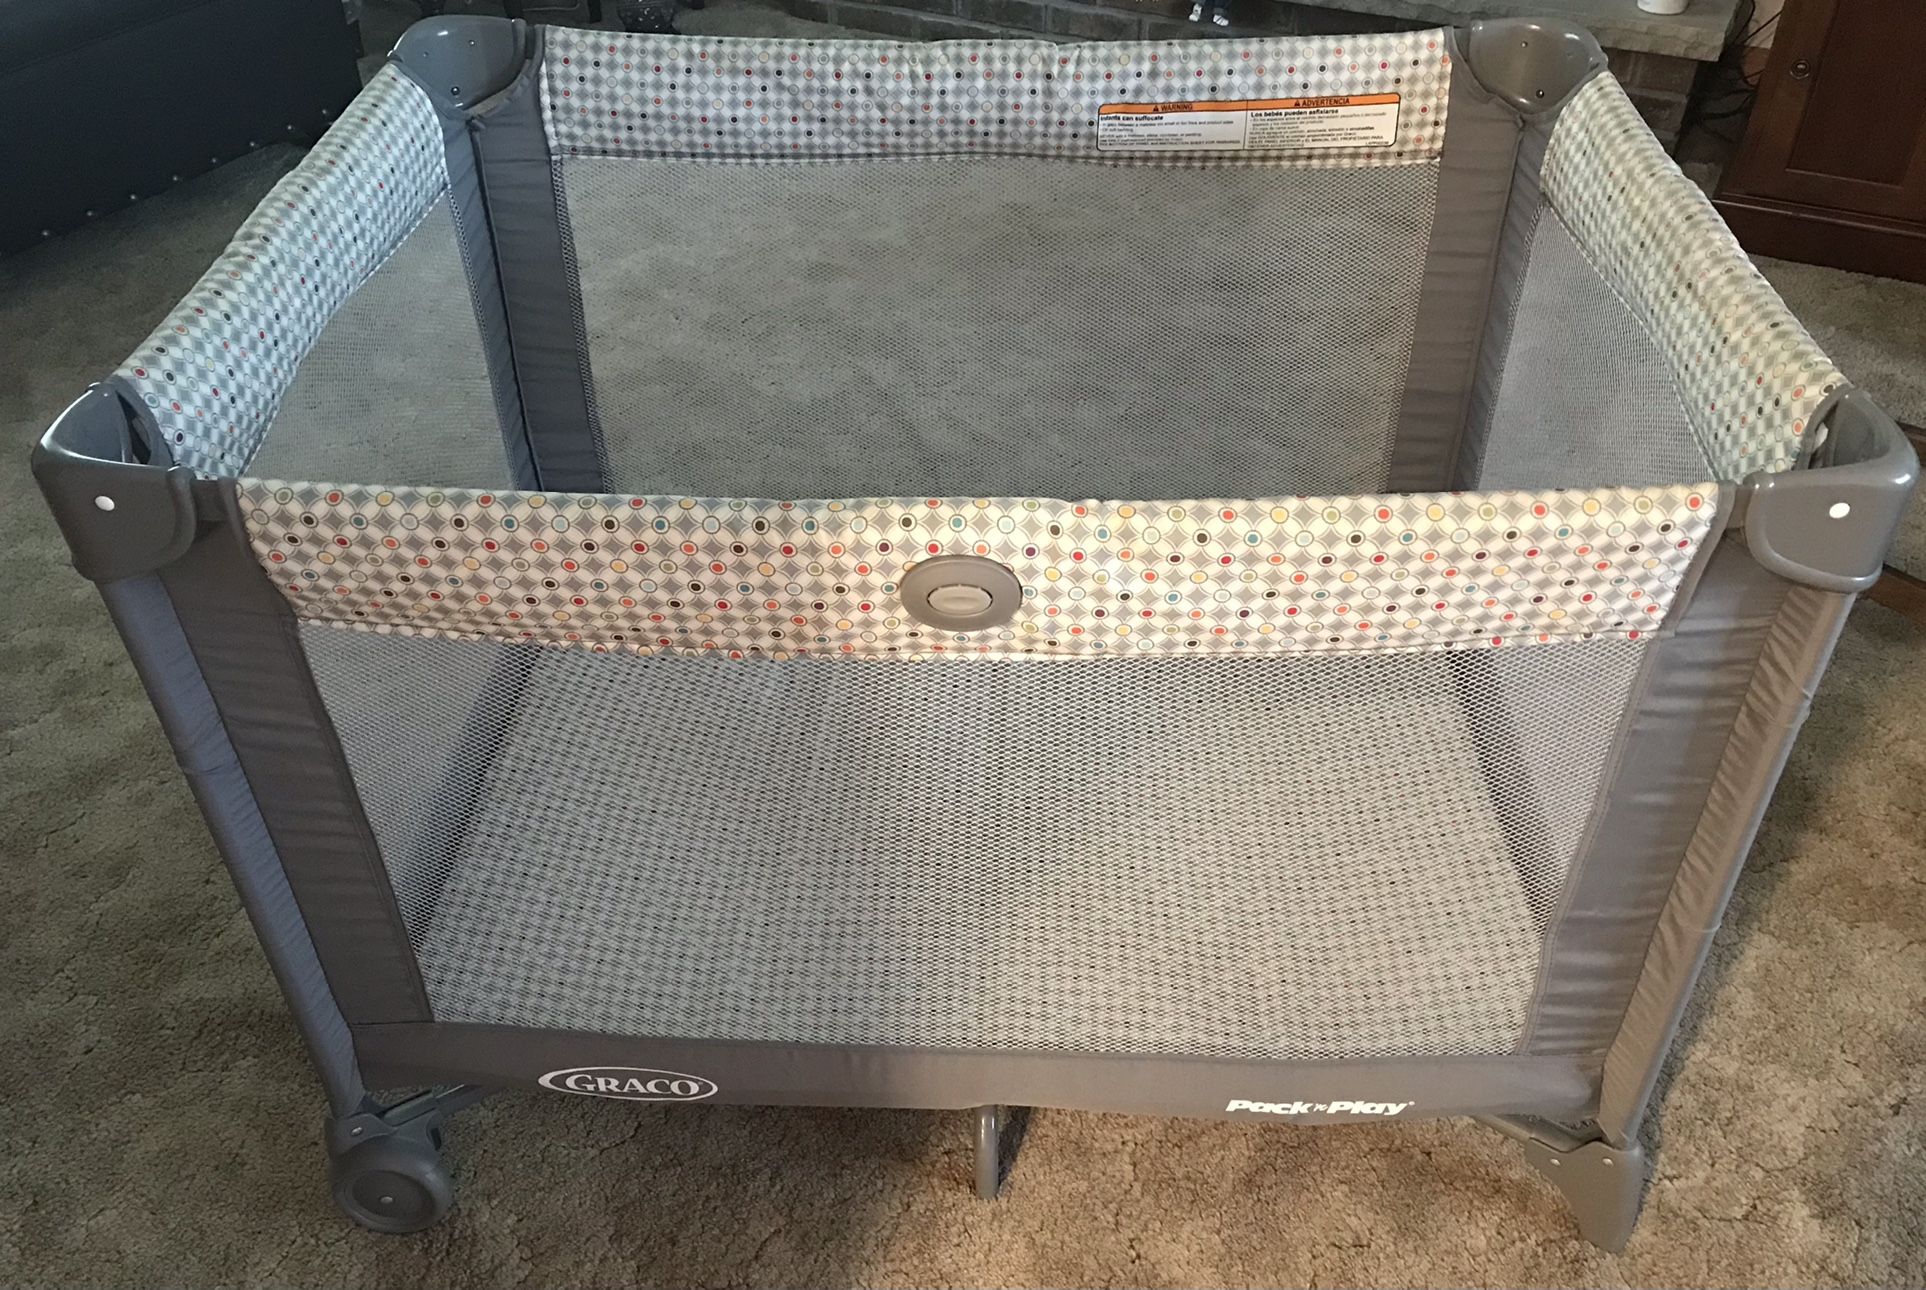 Graco Pack & Play, Mattress, 2 Mattress Pads, 5 Sheets - Excellent Condition, Pickup Only, OBO - Perfect for Grandma’s House, Traveling, etc